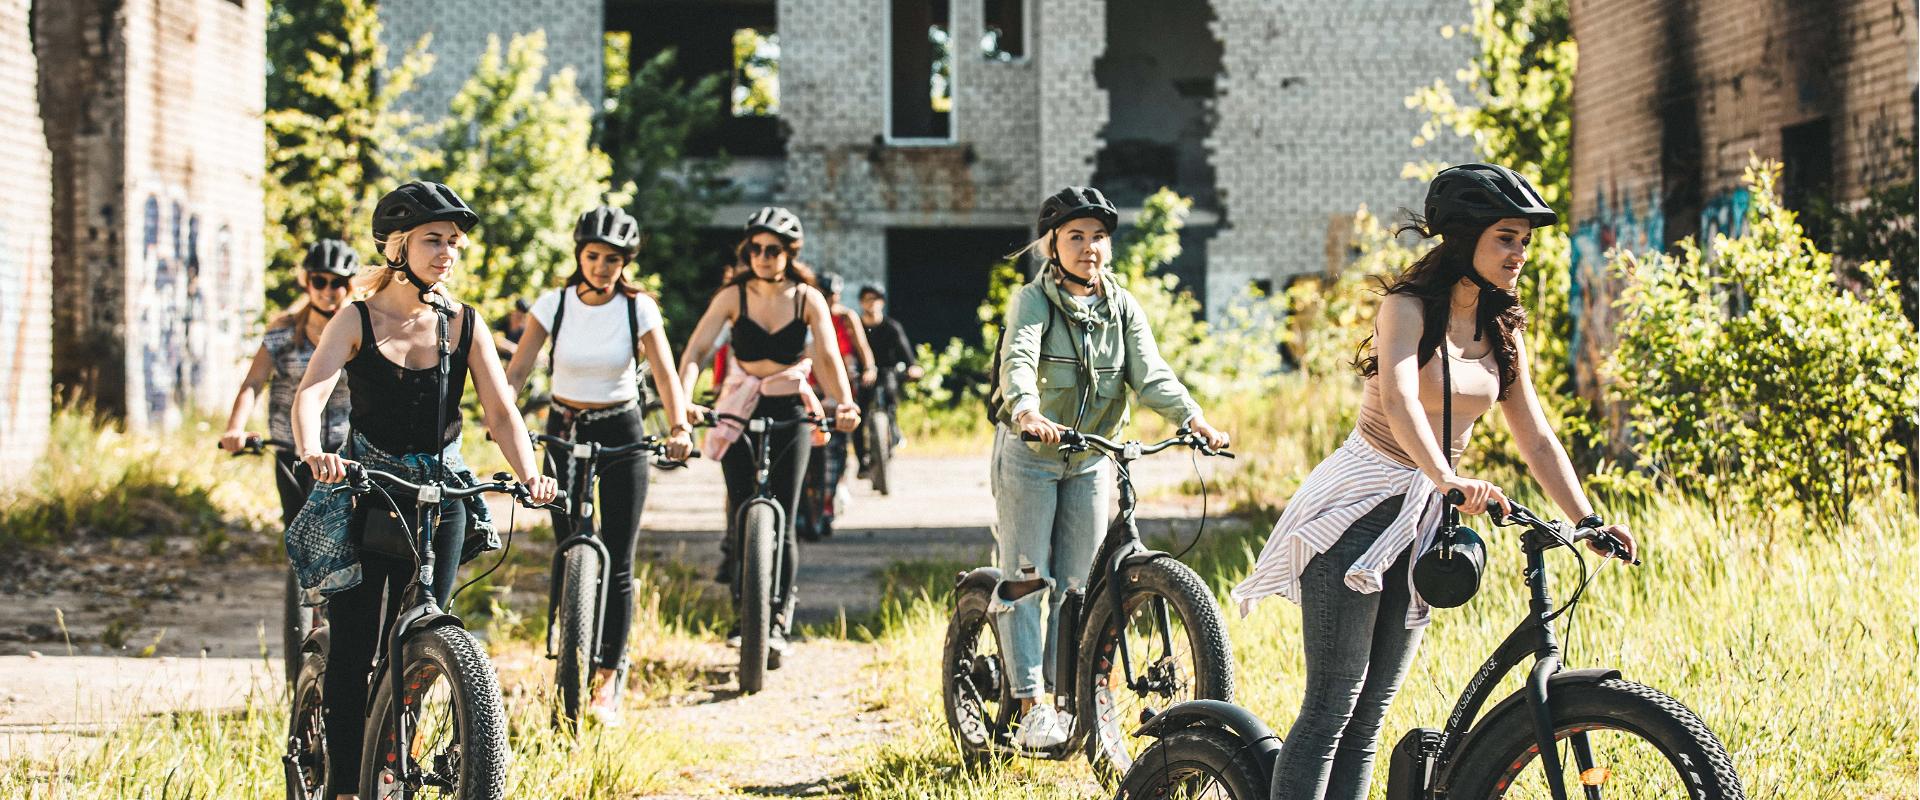 Electric Bike Tours on the Trails of the Rummu Quarry and the Padise Monastery